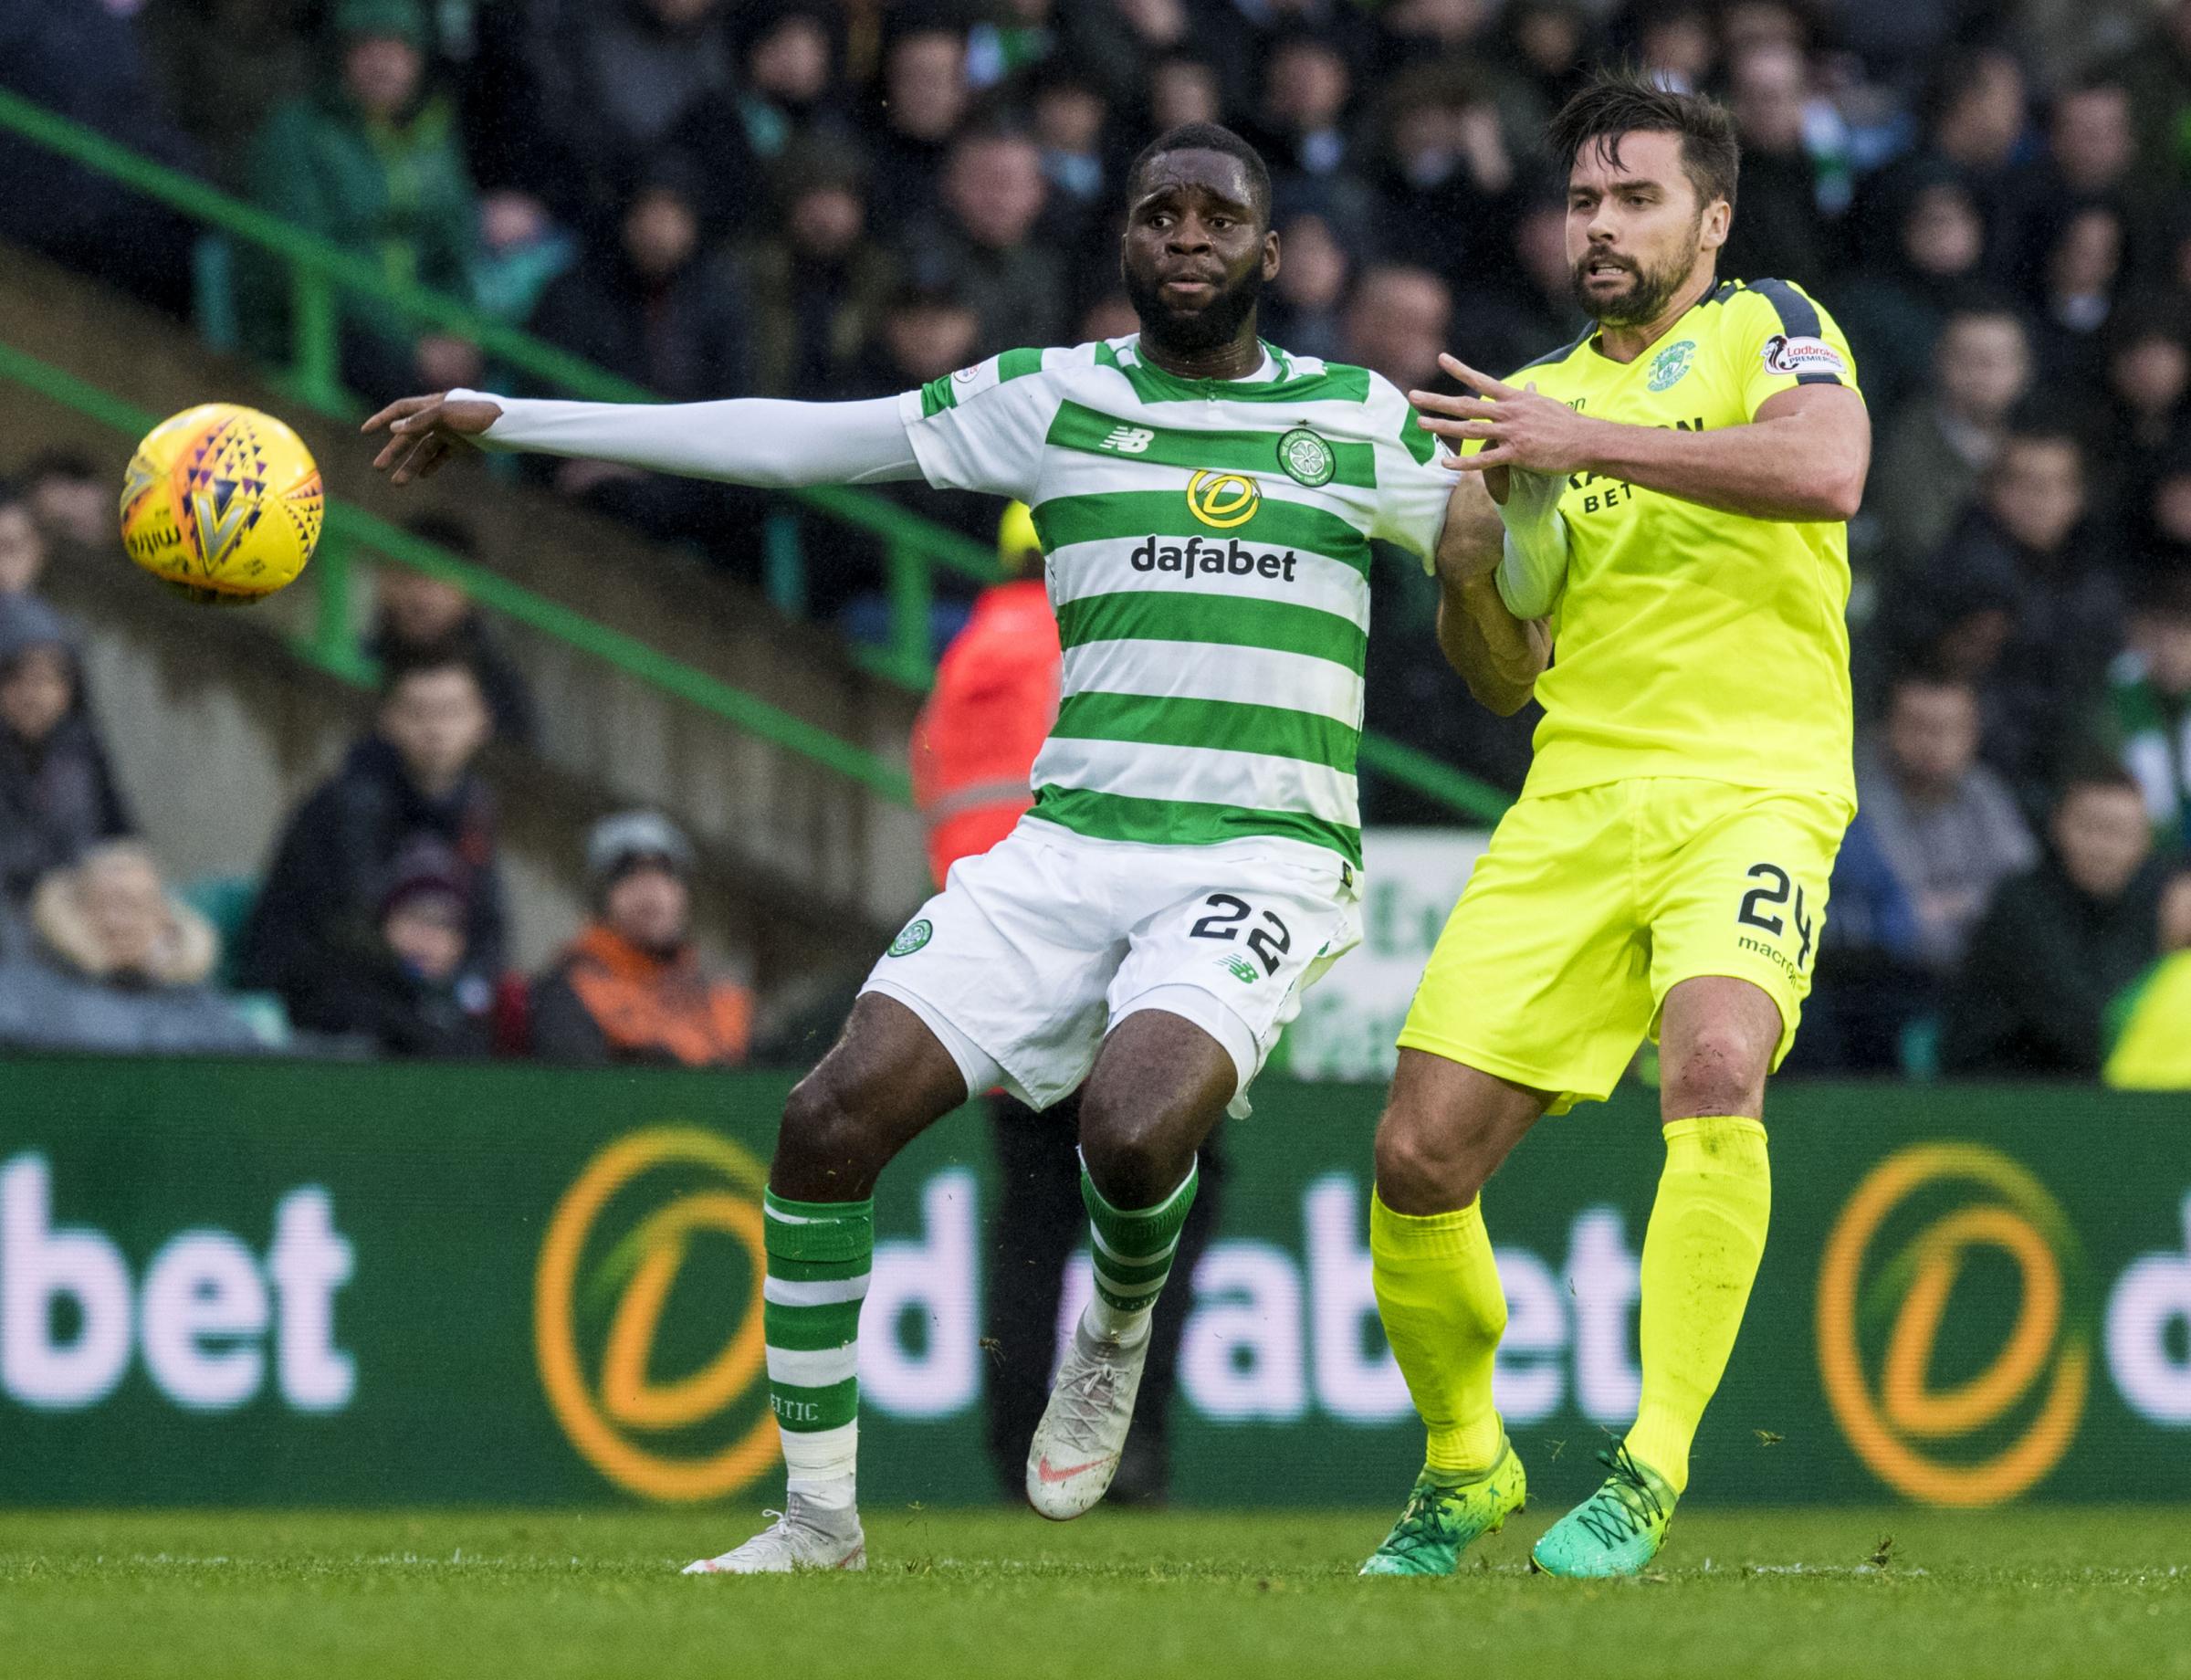 Hibernian weren’t playing “against 12 men” at Parkhead – the referee’s decisions went against Celtic too